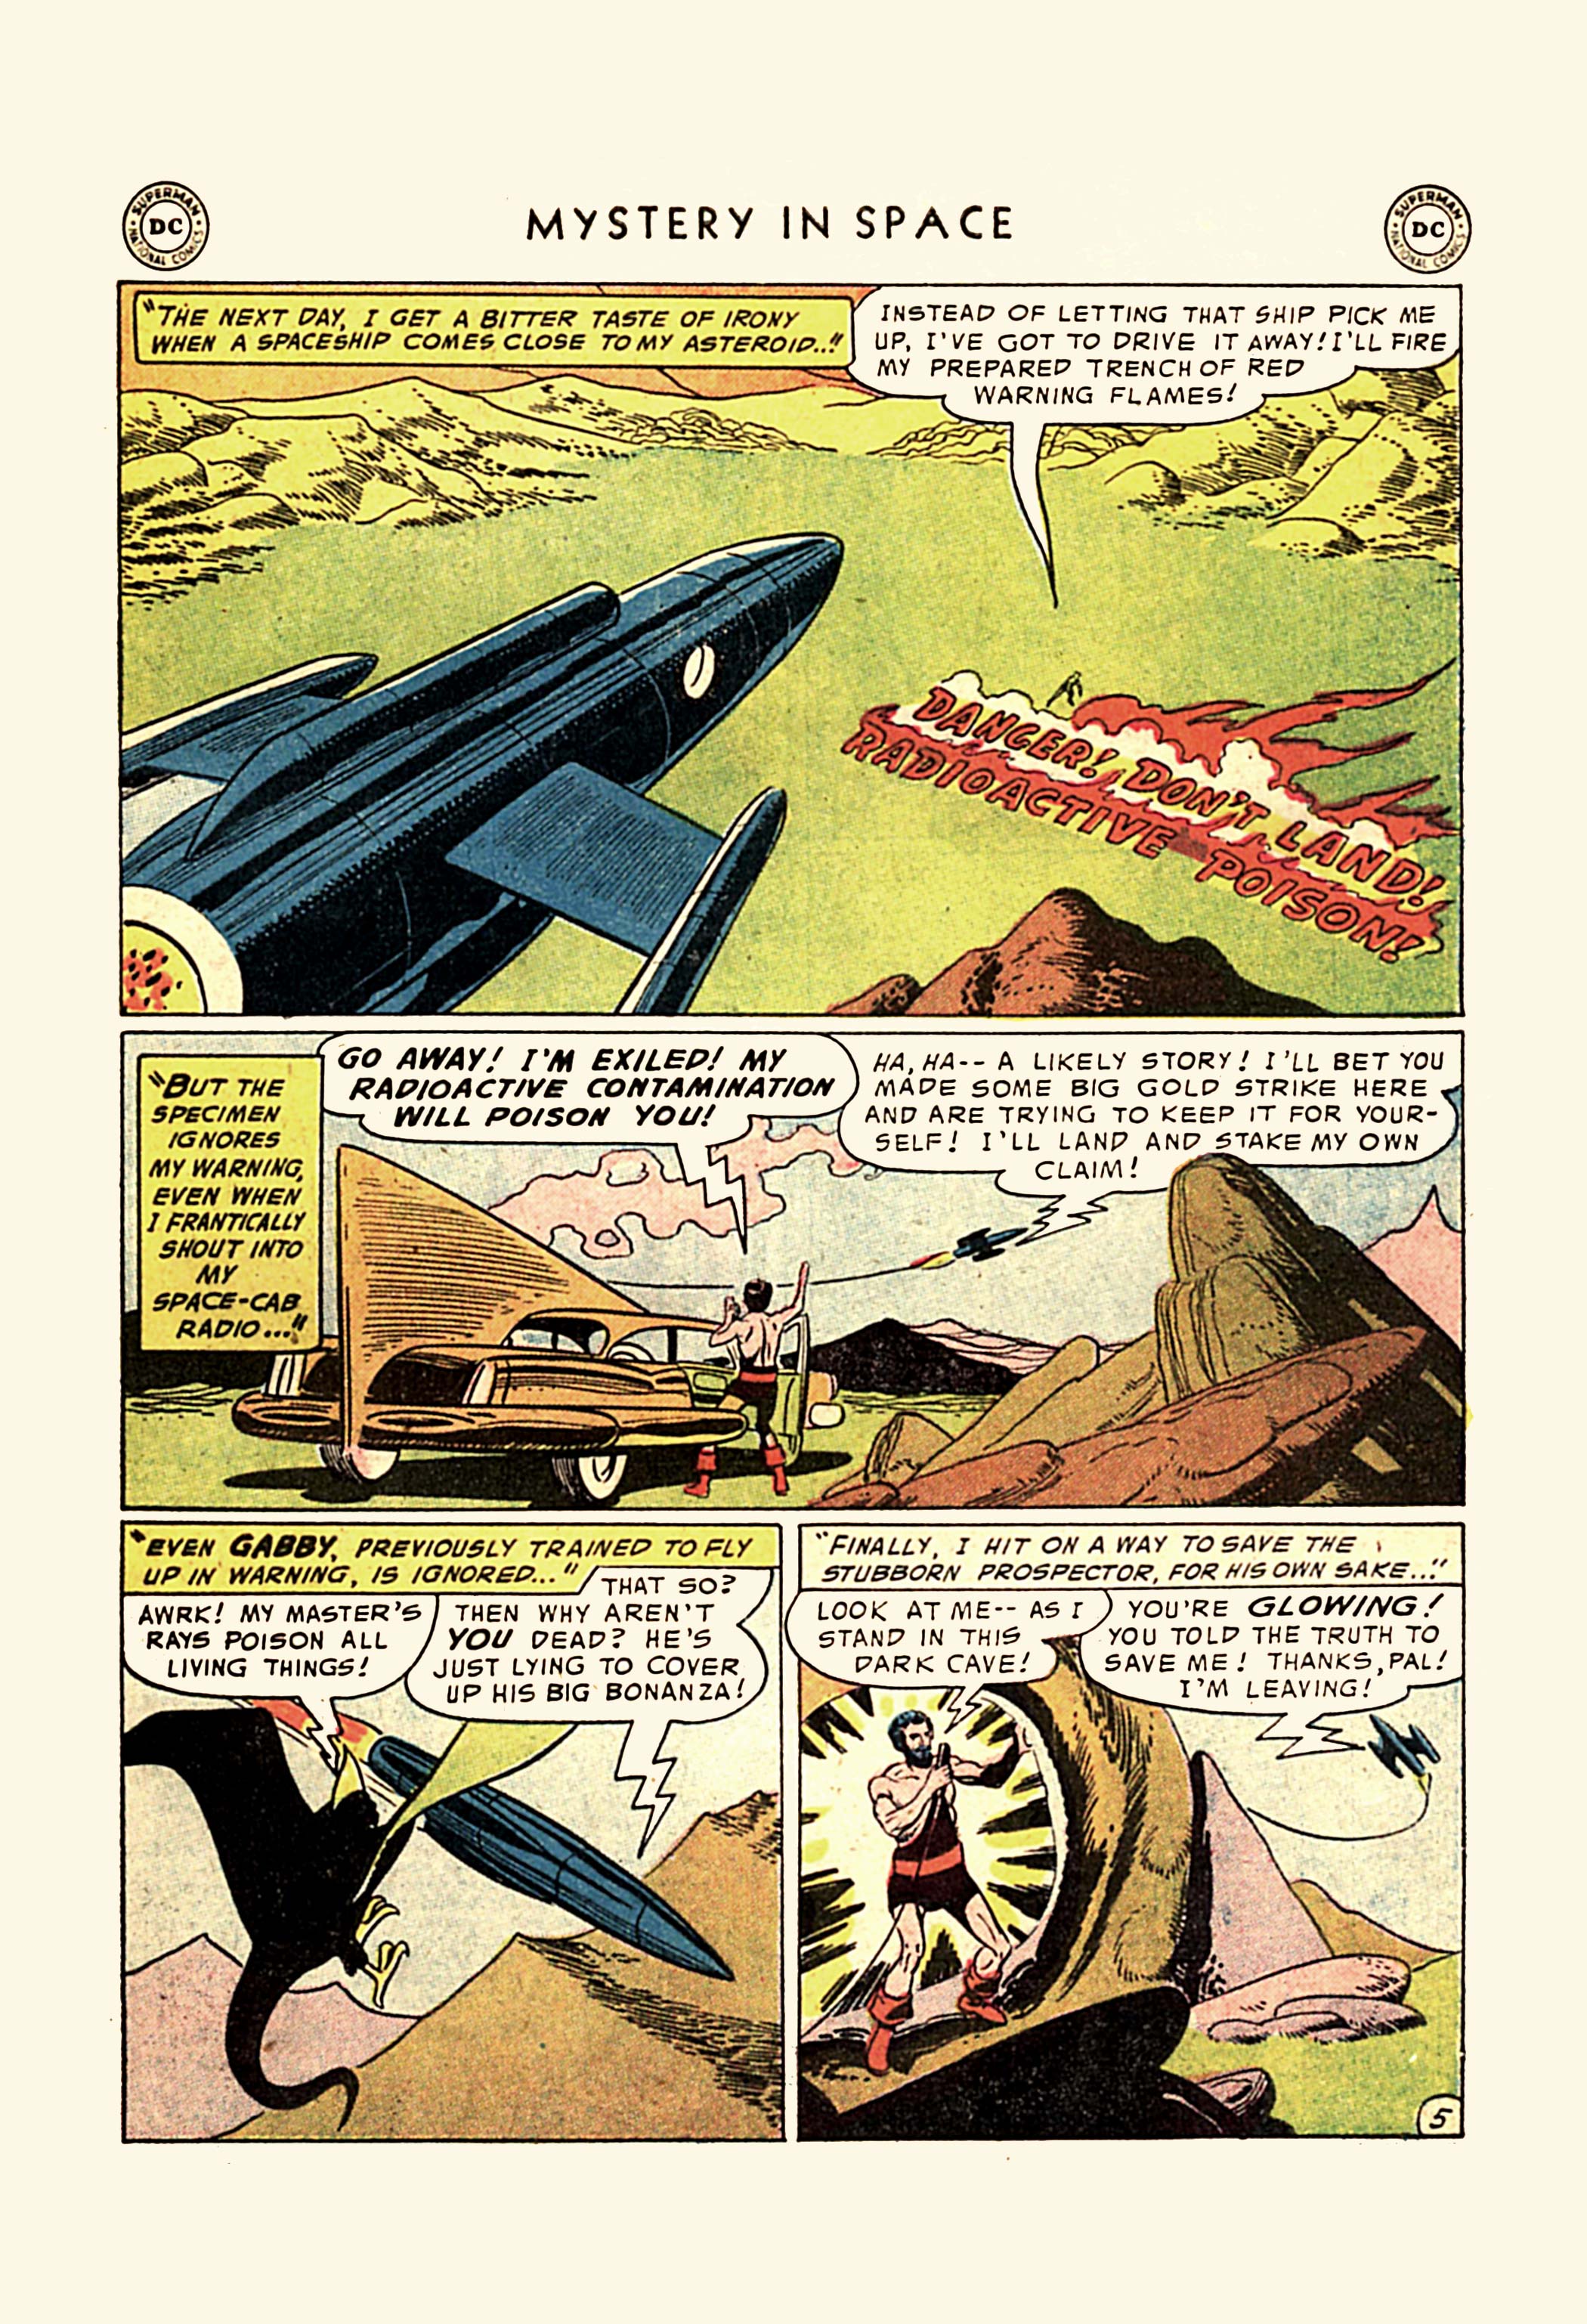 Mystery in Space (1951) 30 Page 30